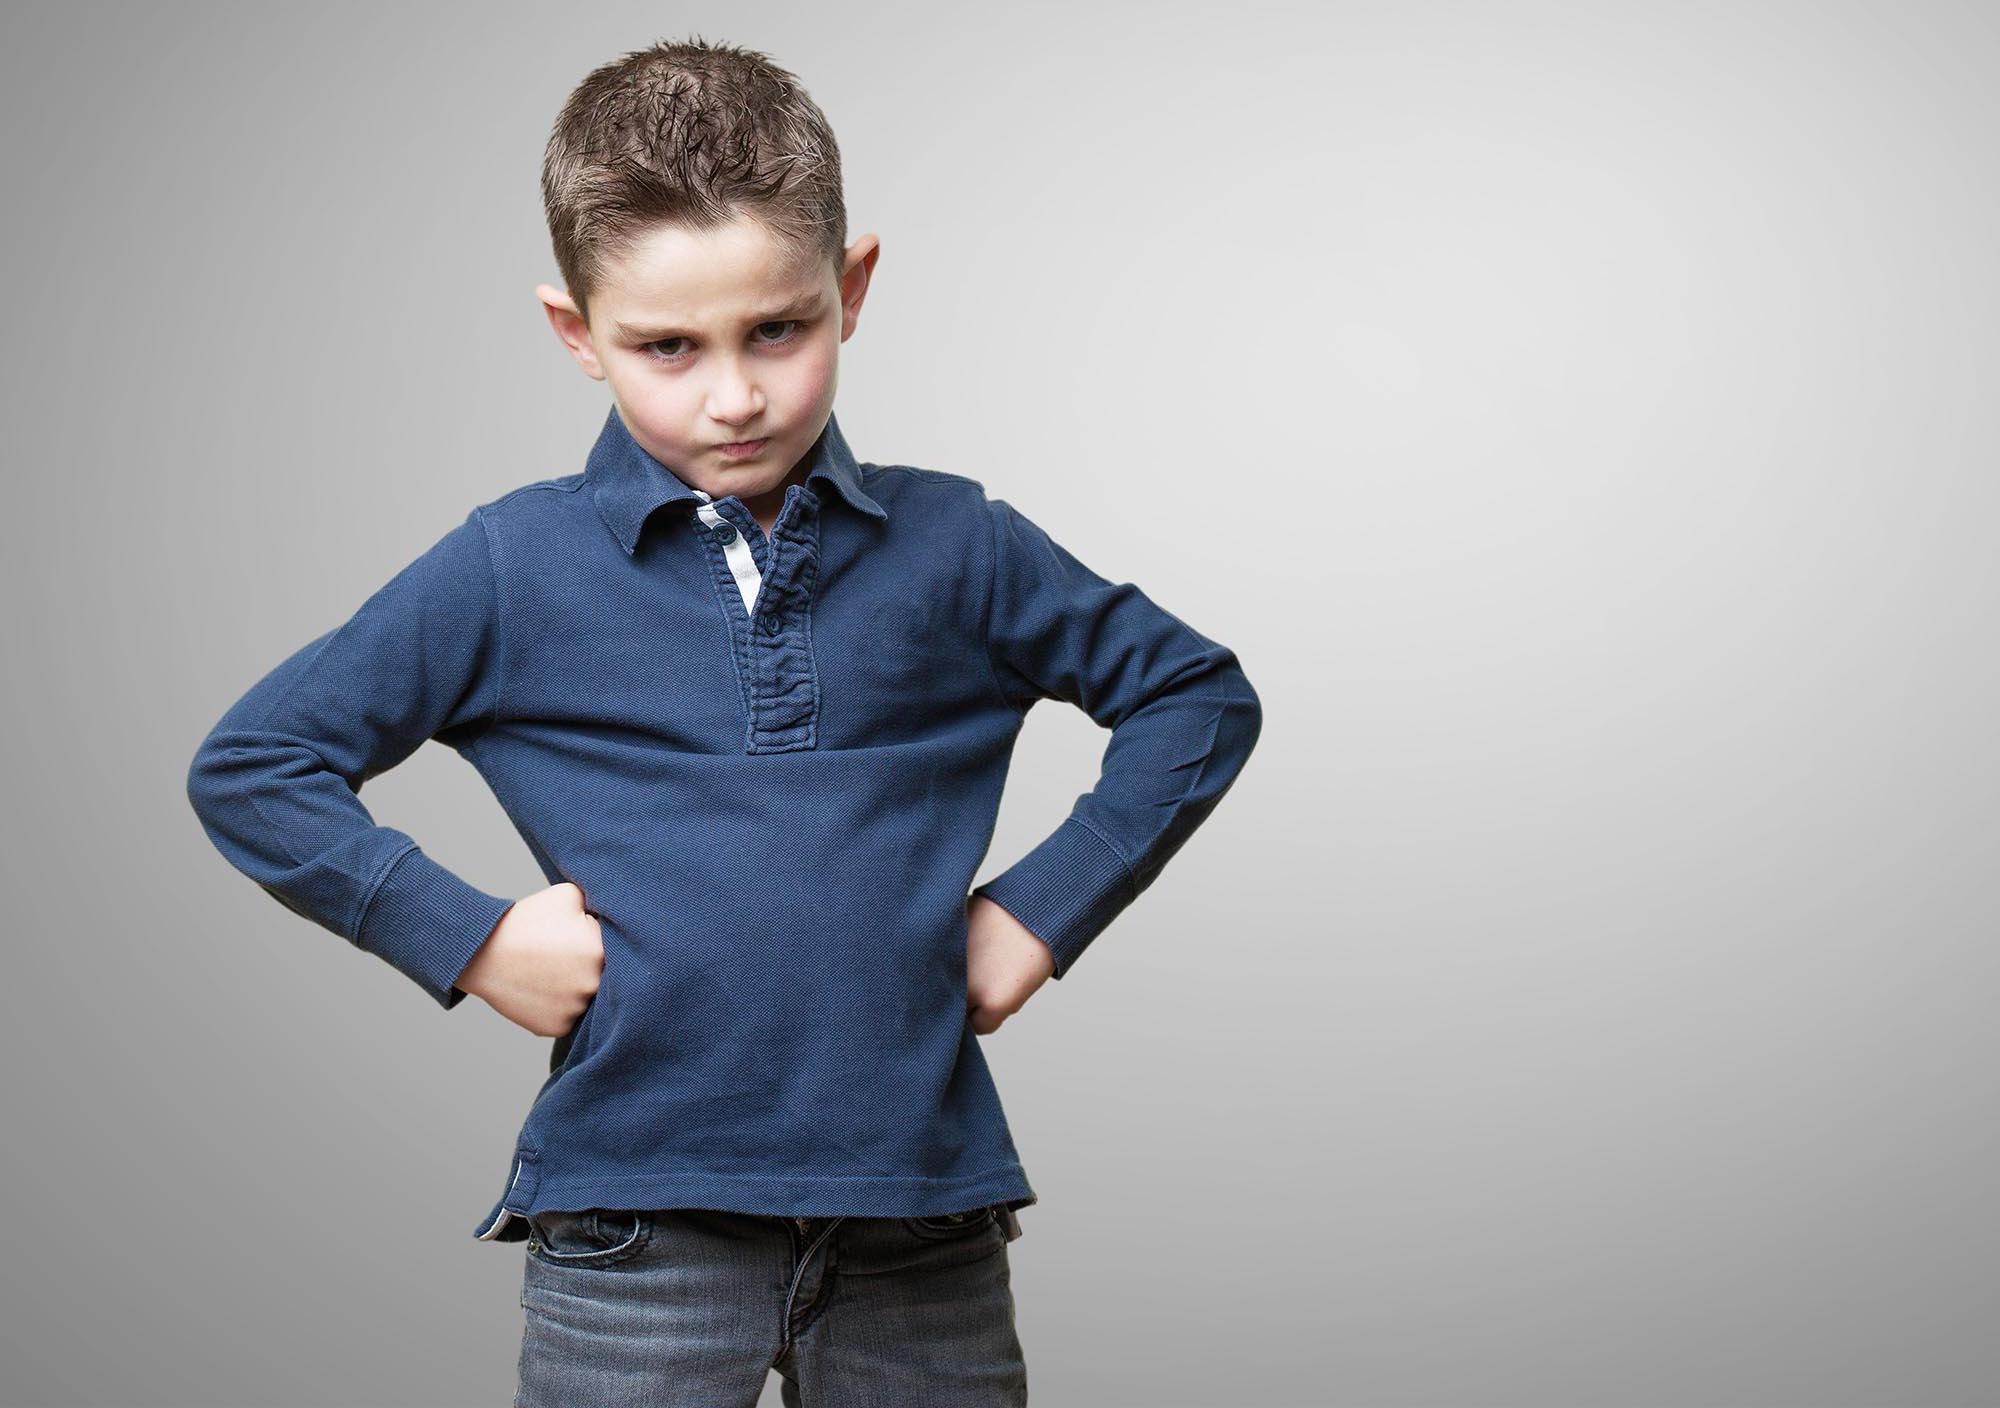 5 Horrible Mistakes You’re Making With Stubborn Child